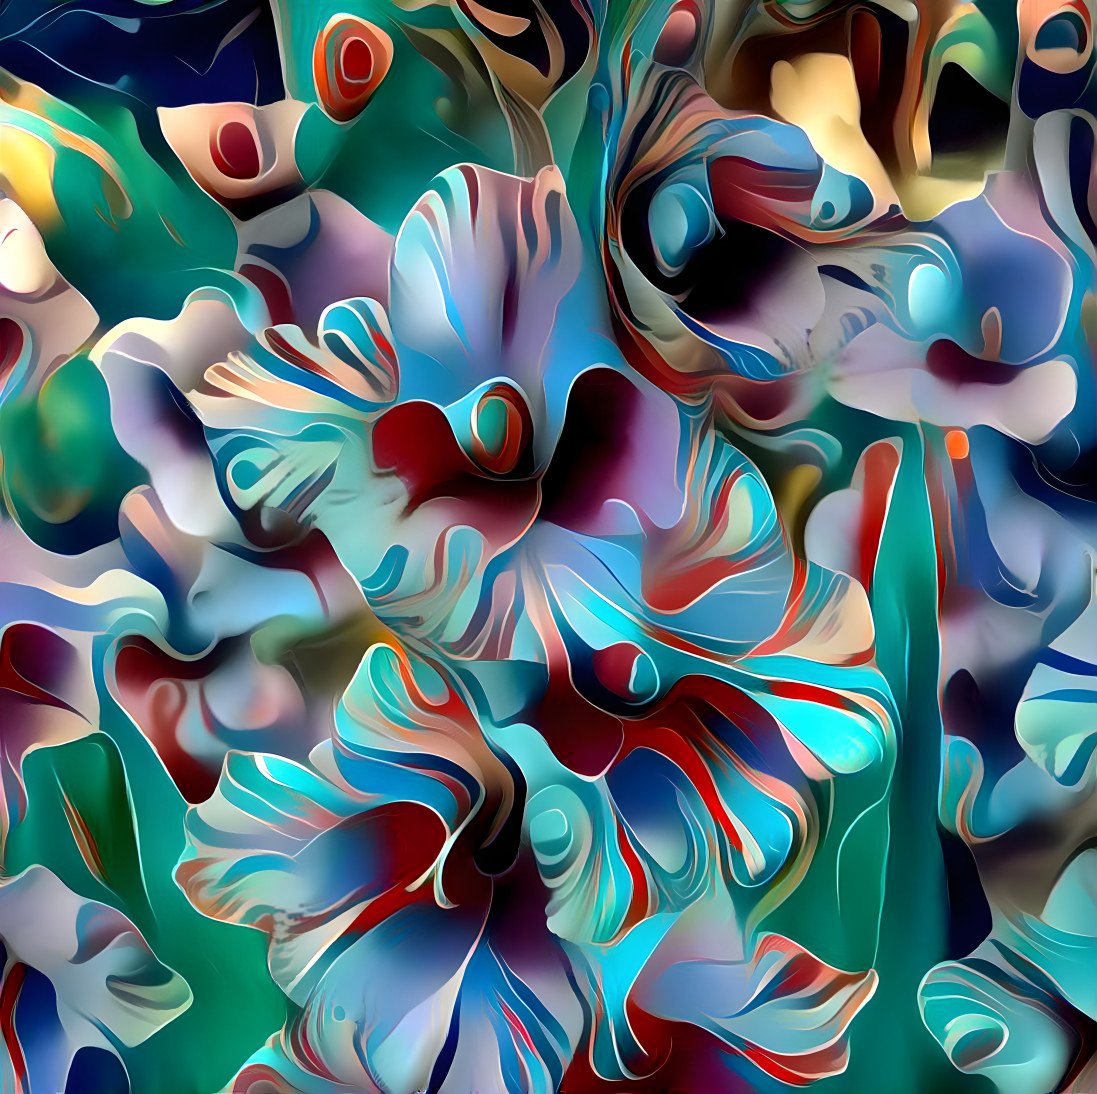 Incognito flowers